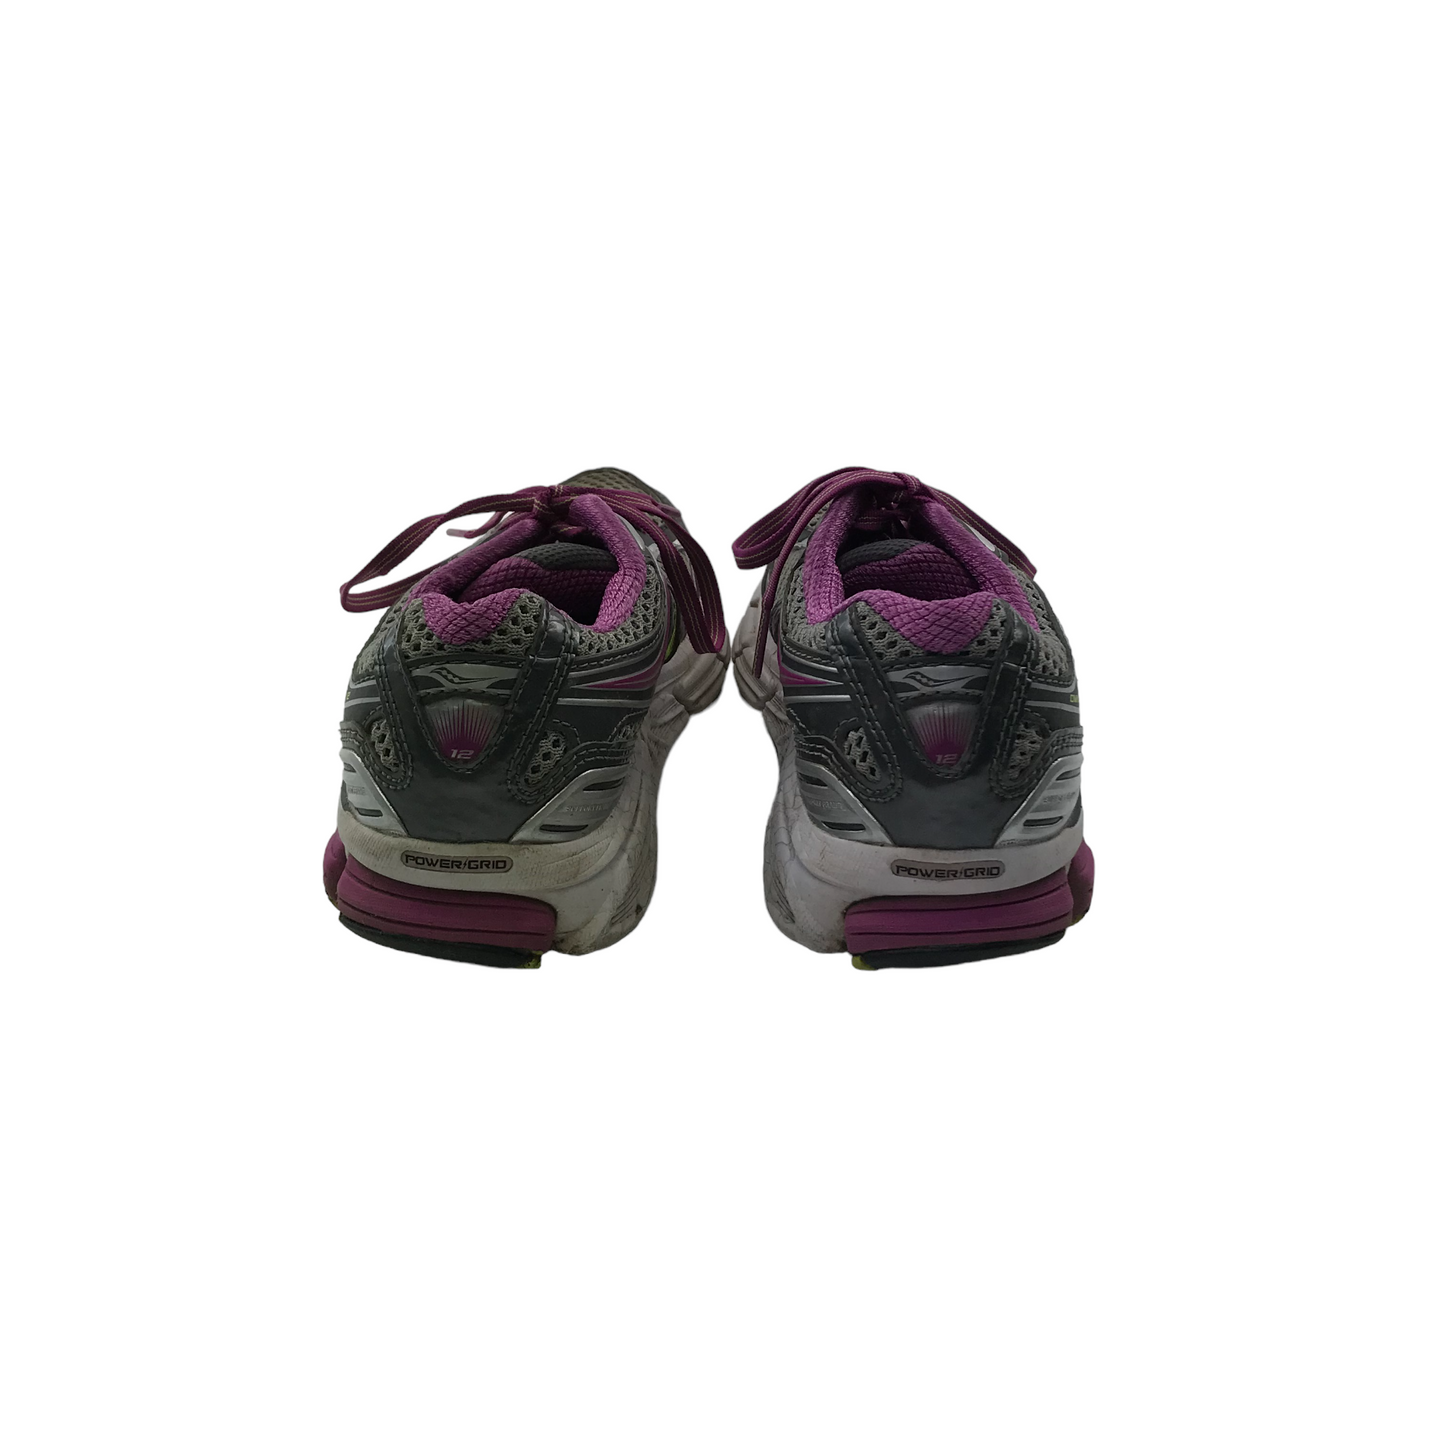 Saucony Omni 12 Grey and Purple Running Trainers Shoe Size 4.5